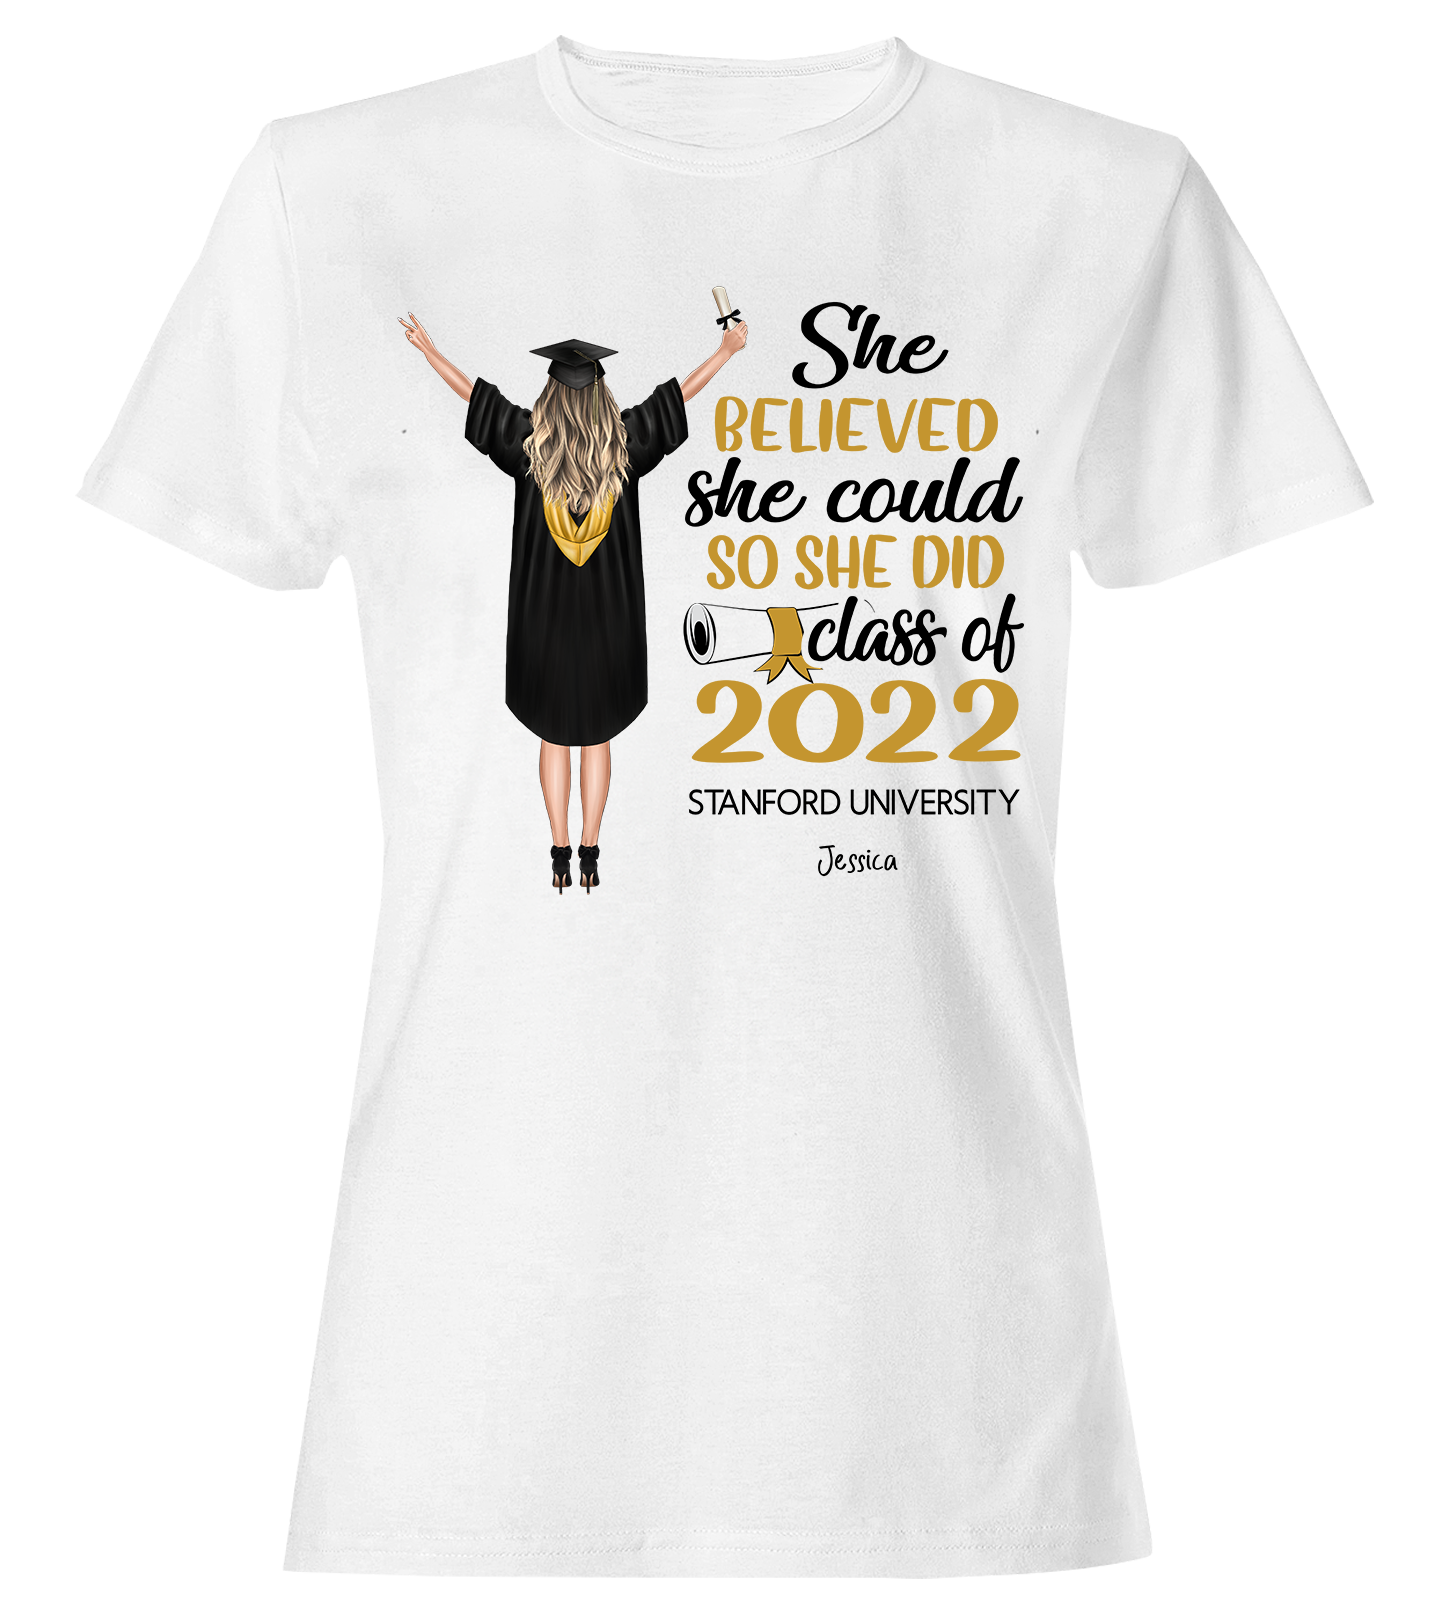 She believed she could so she did class of 2022 - Graduation - Personalized T-Shirt